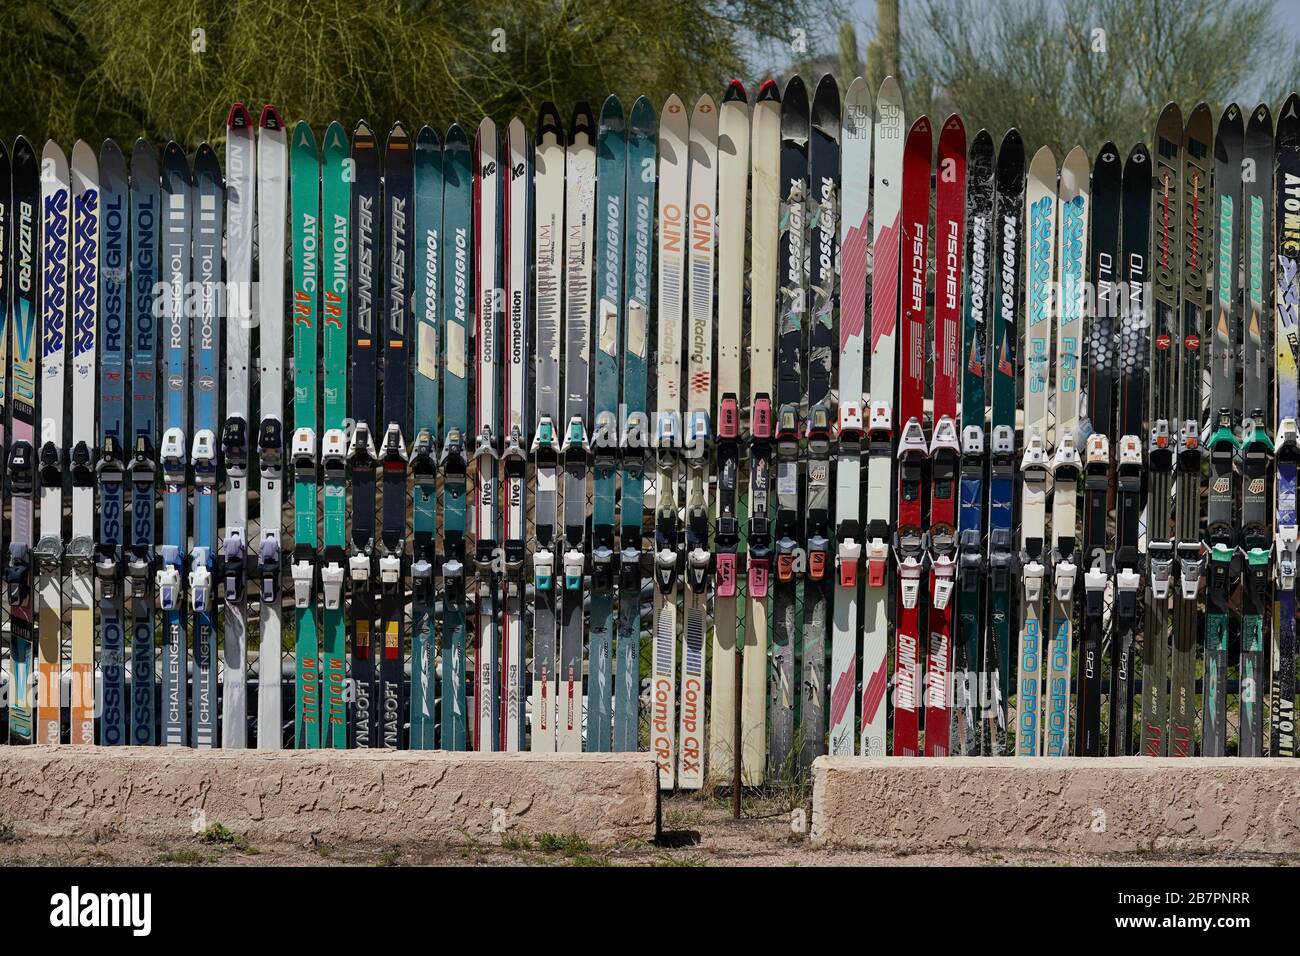 A fence made of repurposed old vintage skis. Stock Photo